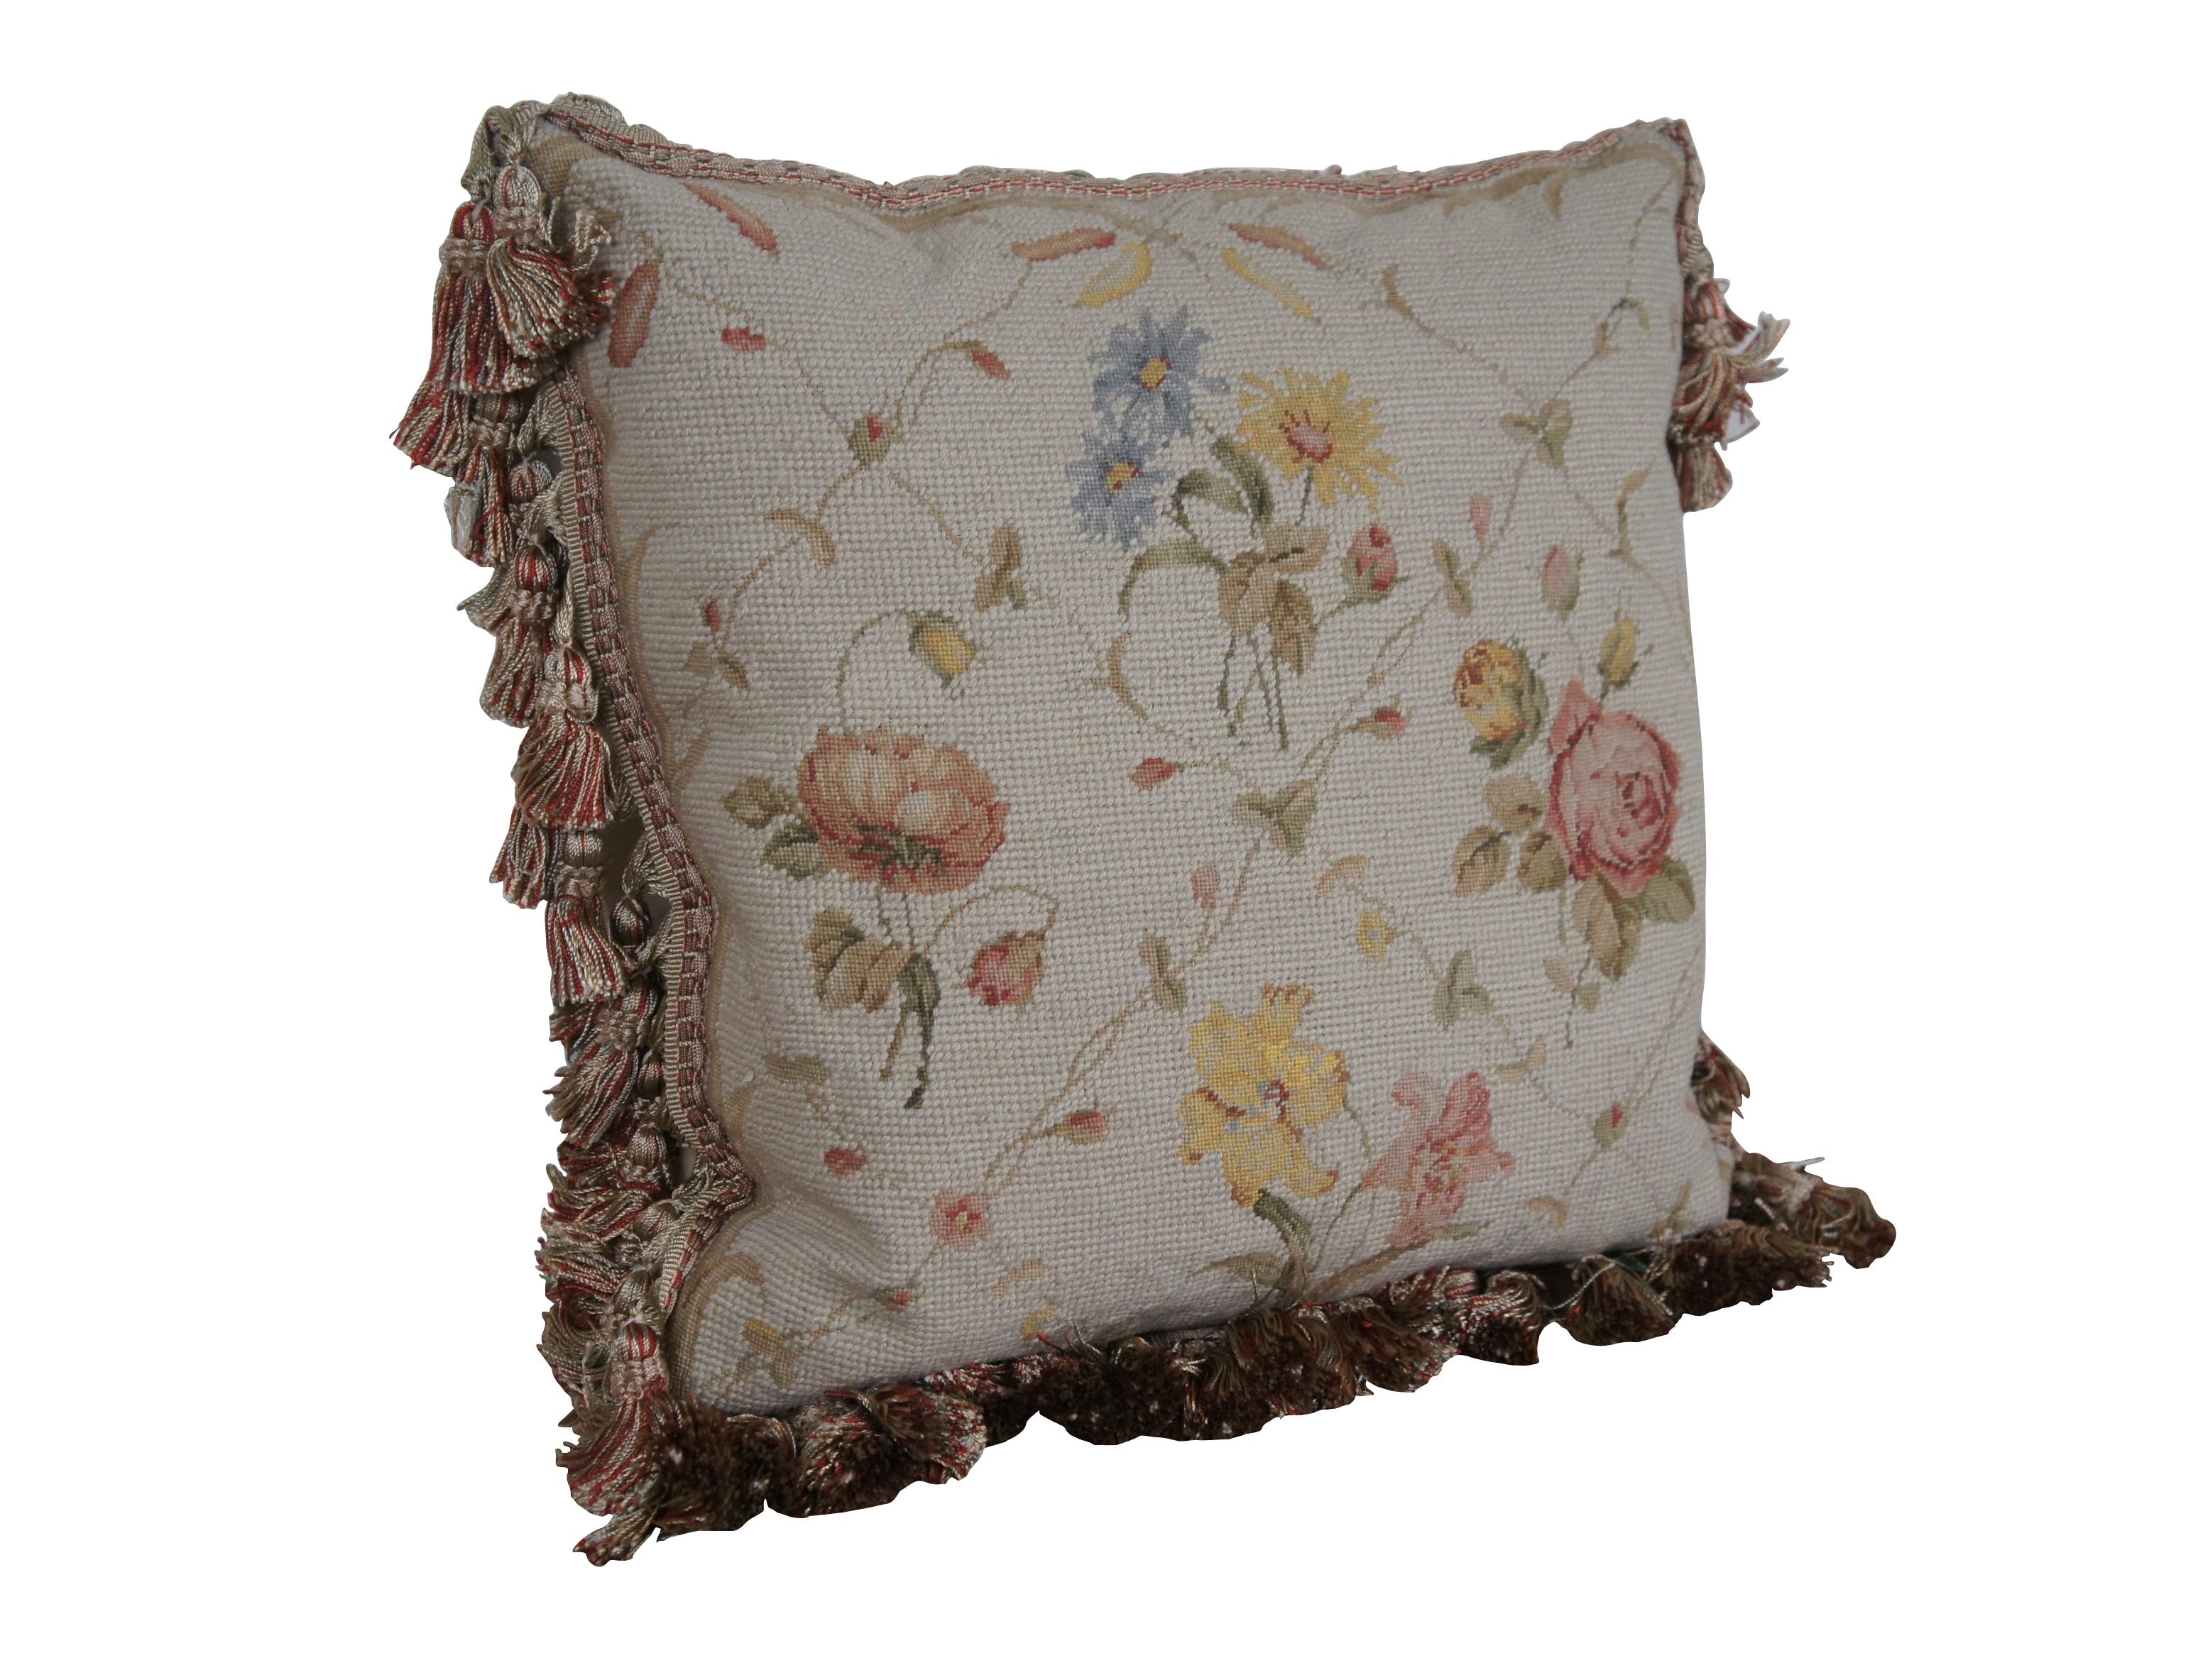 20th century square needlepoint throw pillow, hand embroidered with roses, lilies and daisies in pink, blue, and yellow, divided with criss crossing vines. Rust / rose, gold, and beige tassel trim. Beige velour back with zipper closure. Down